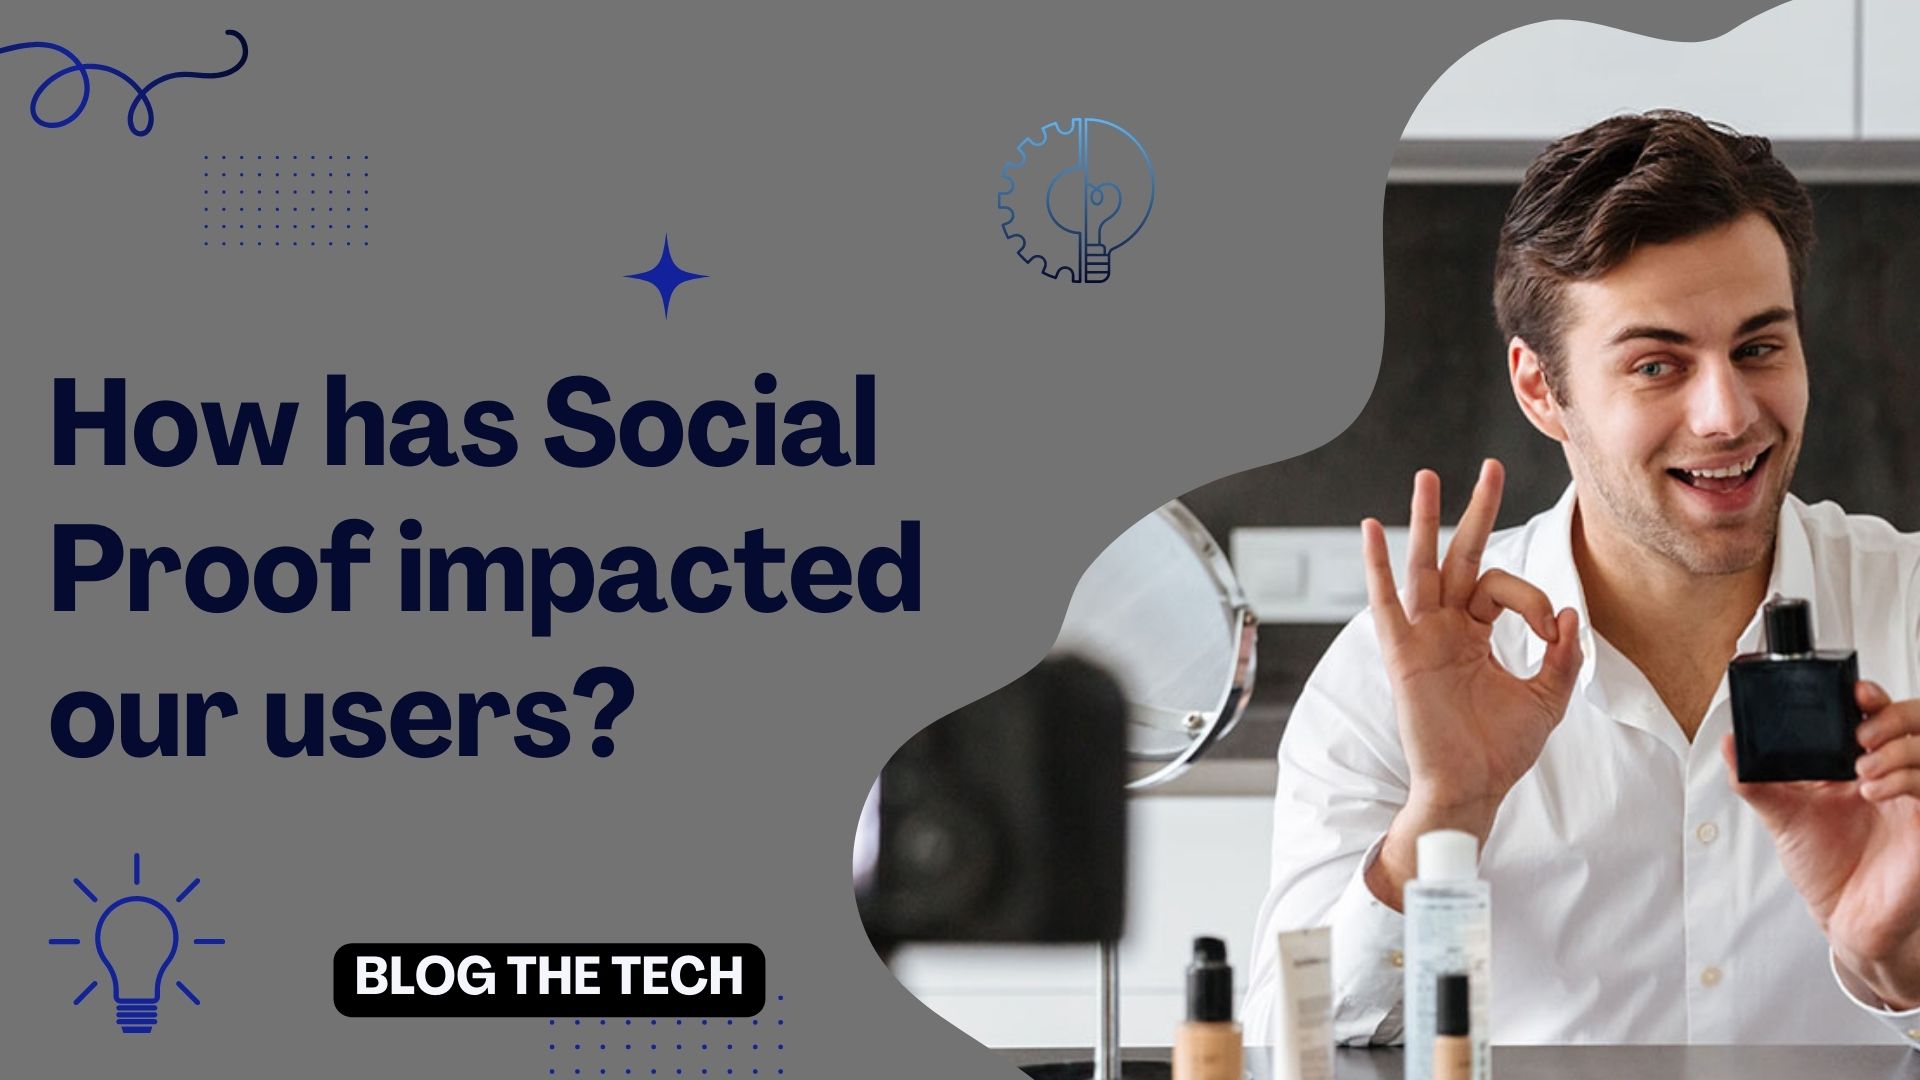 How has Social Proof impacted our users?